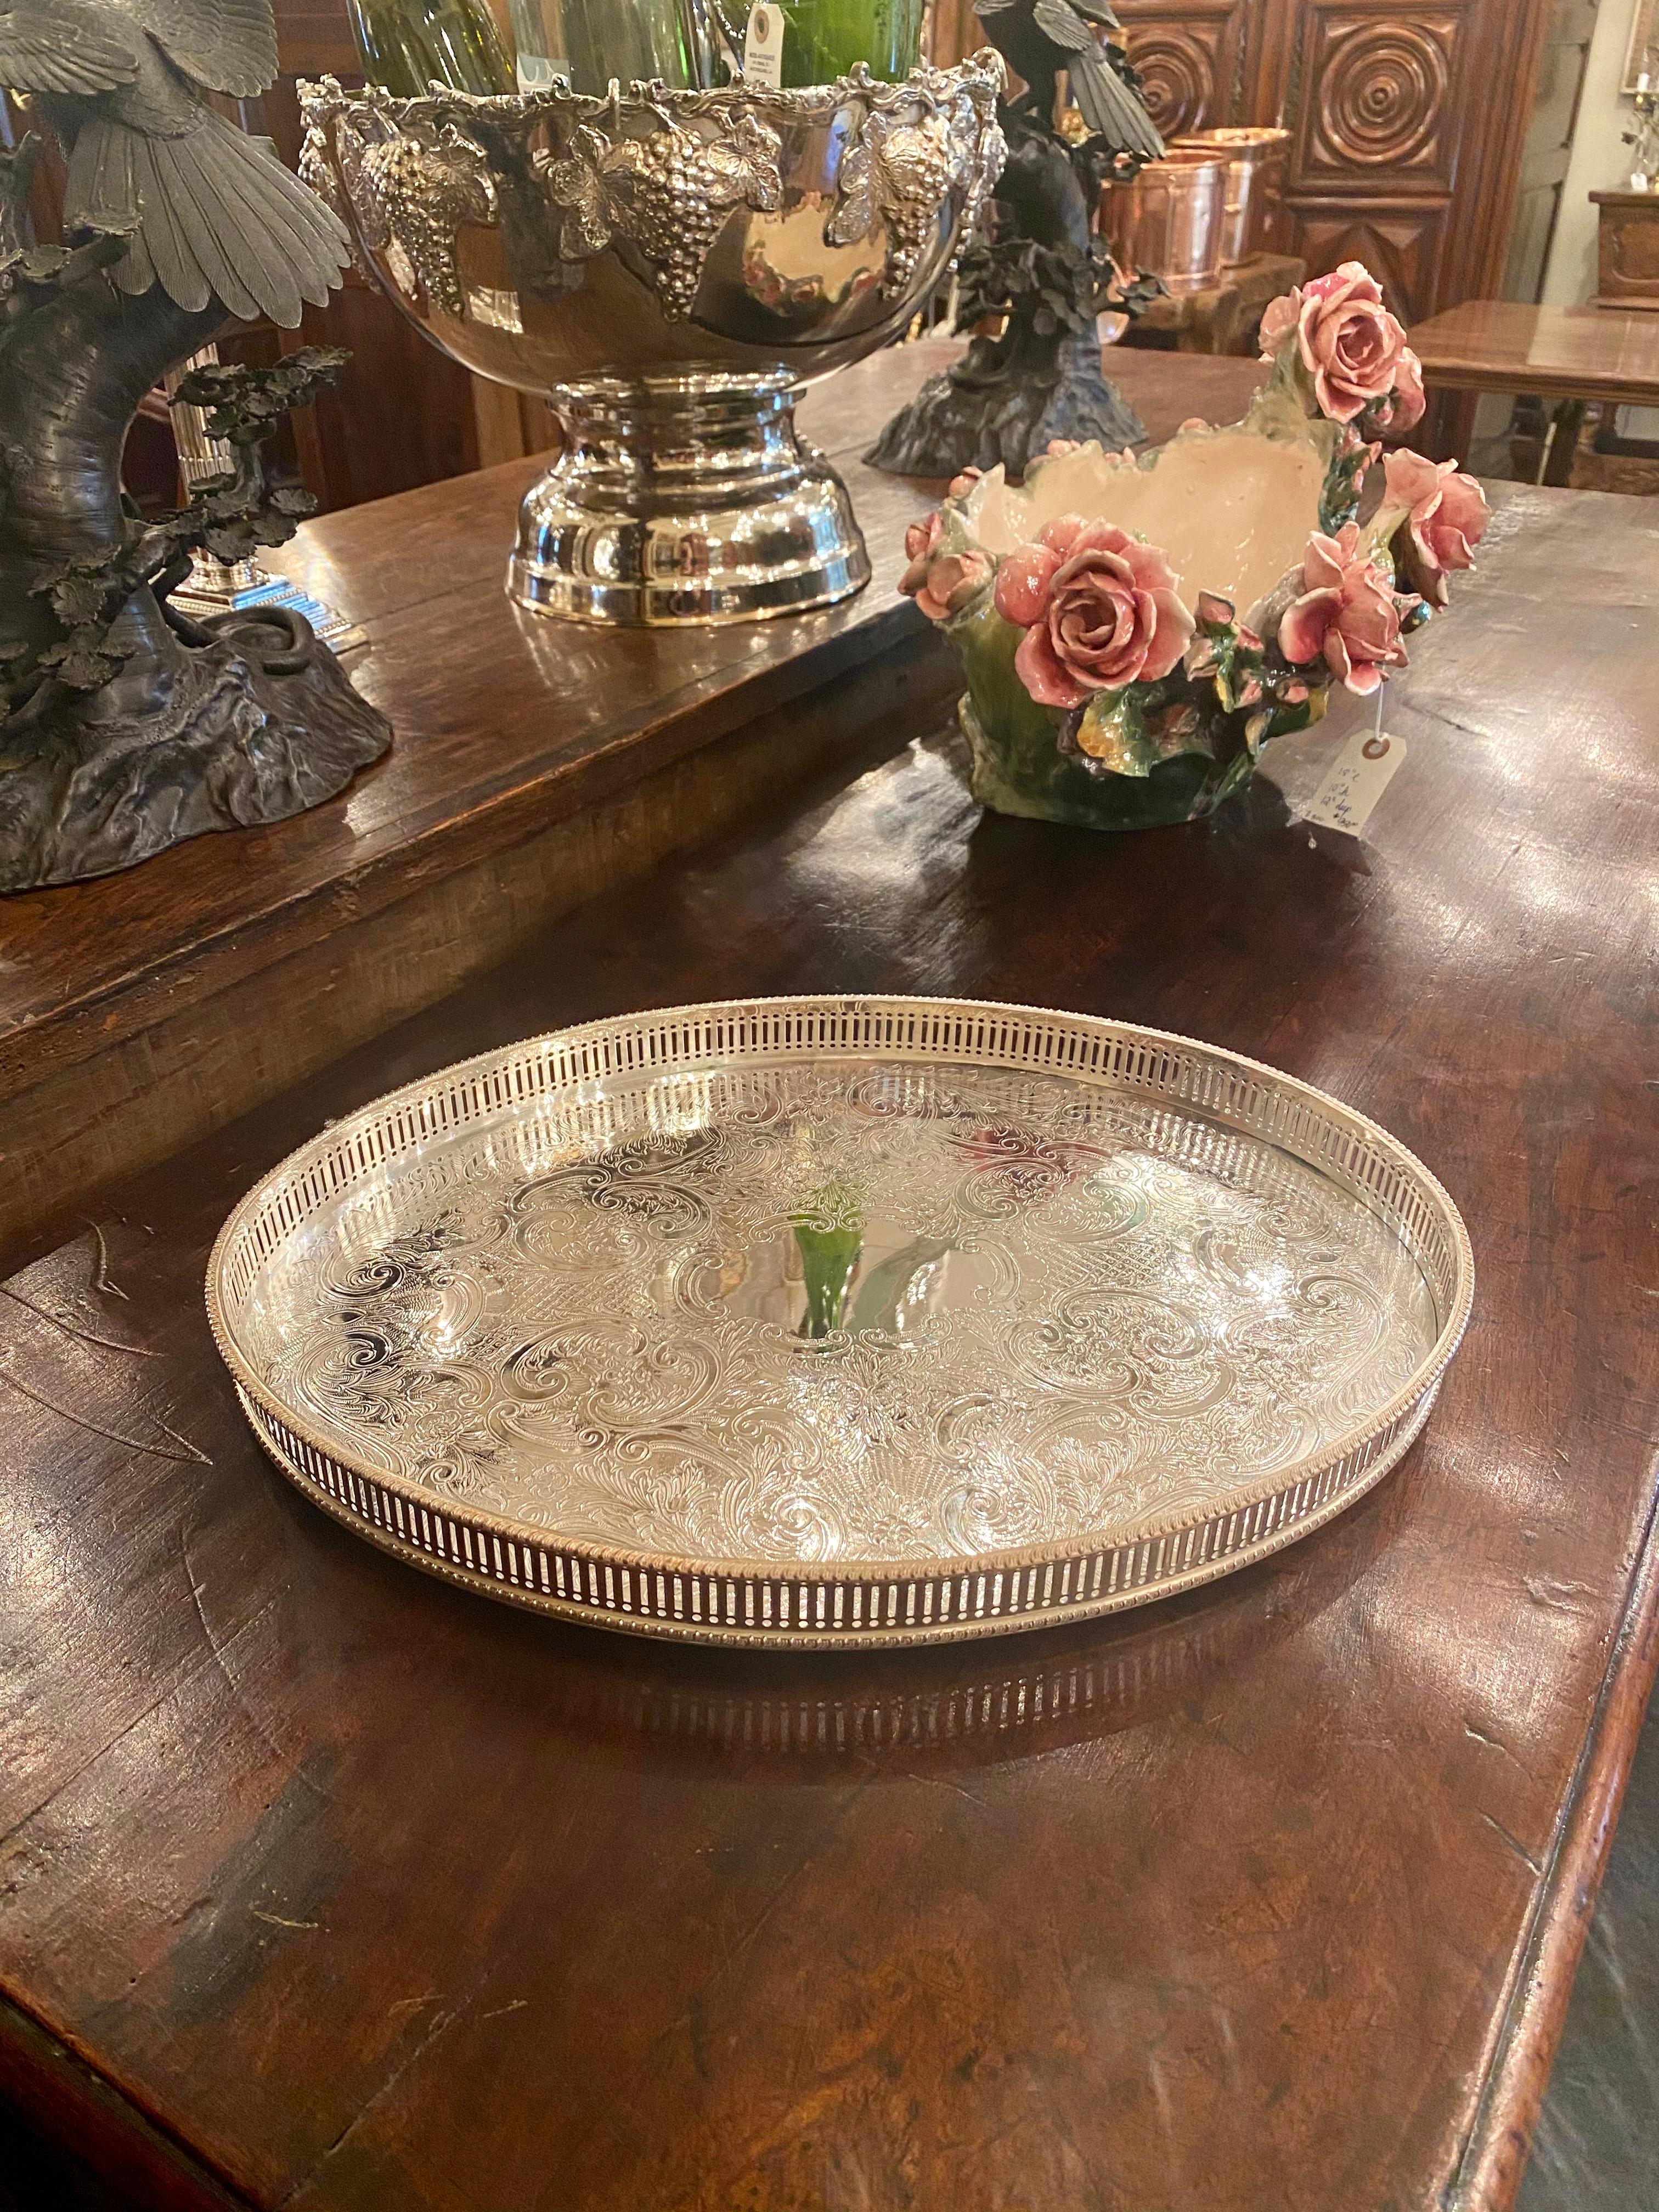 Handmade and Engraved English Silver Plated Footed Oval Tray with Gallery 4